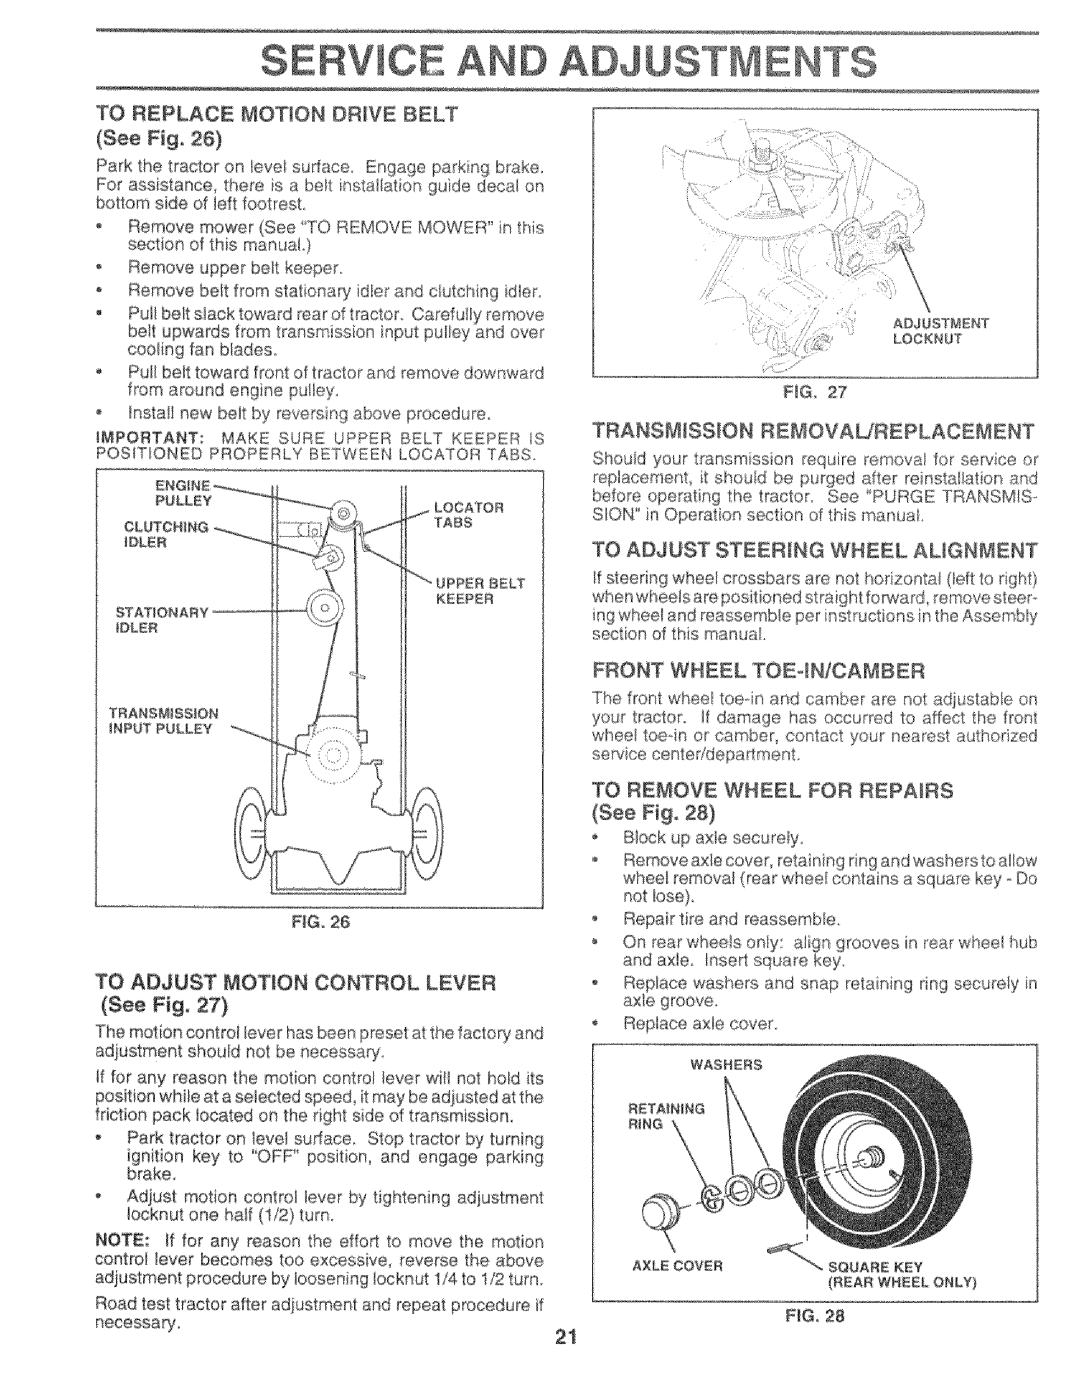 Sears 917.25759 TO REPLACE MOTION DRIVE BELT See Fig, Transmission Removaureplacement, To Adjust Steering Wheel Augnment 